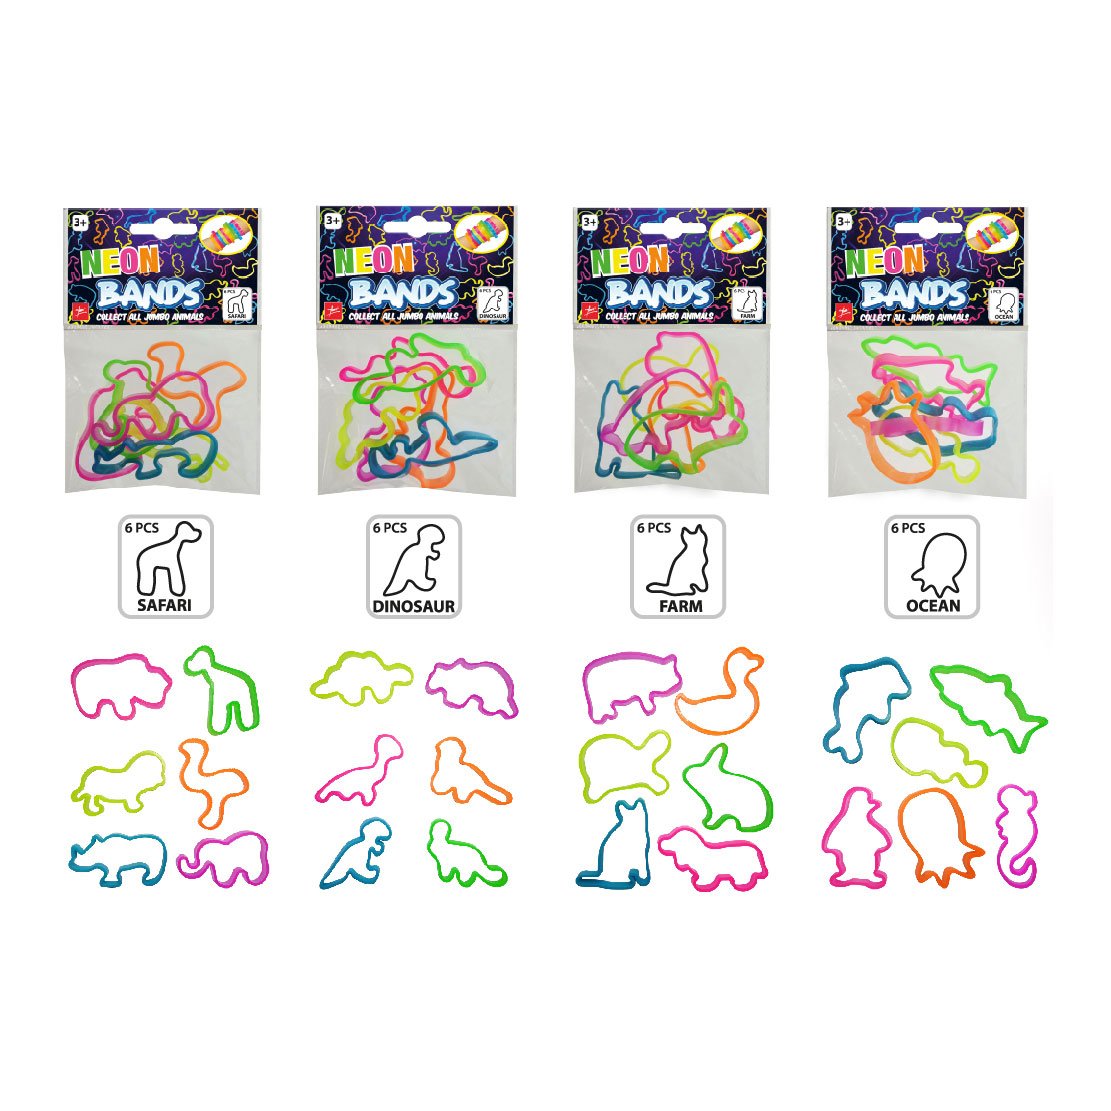 Neon Bands, 36st in Displaybox